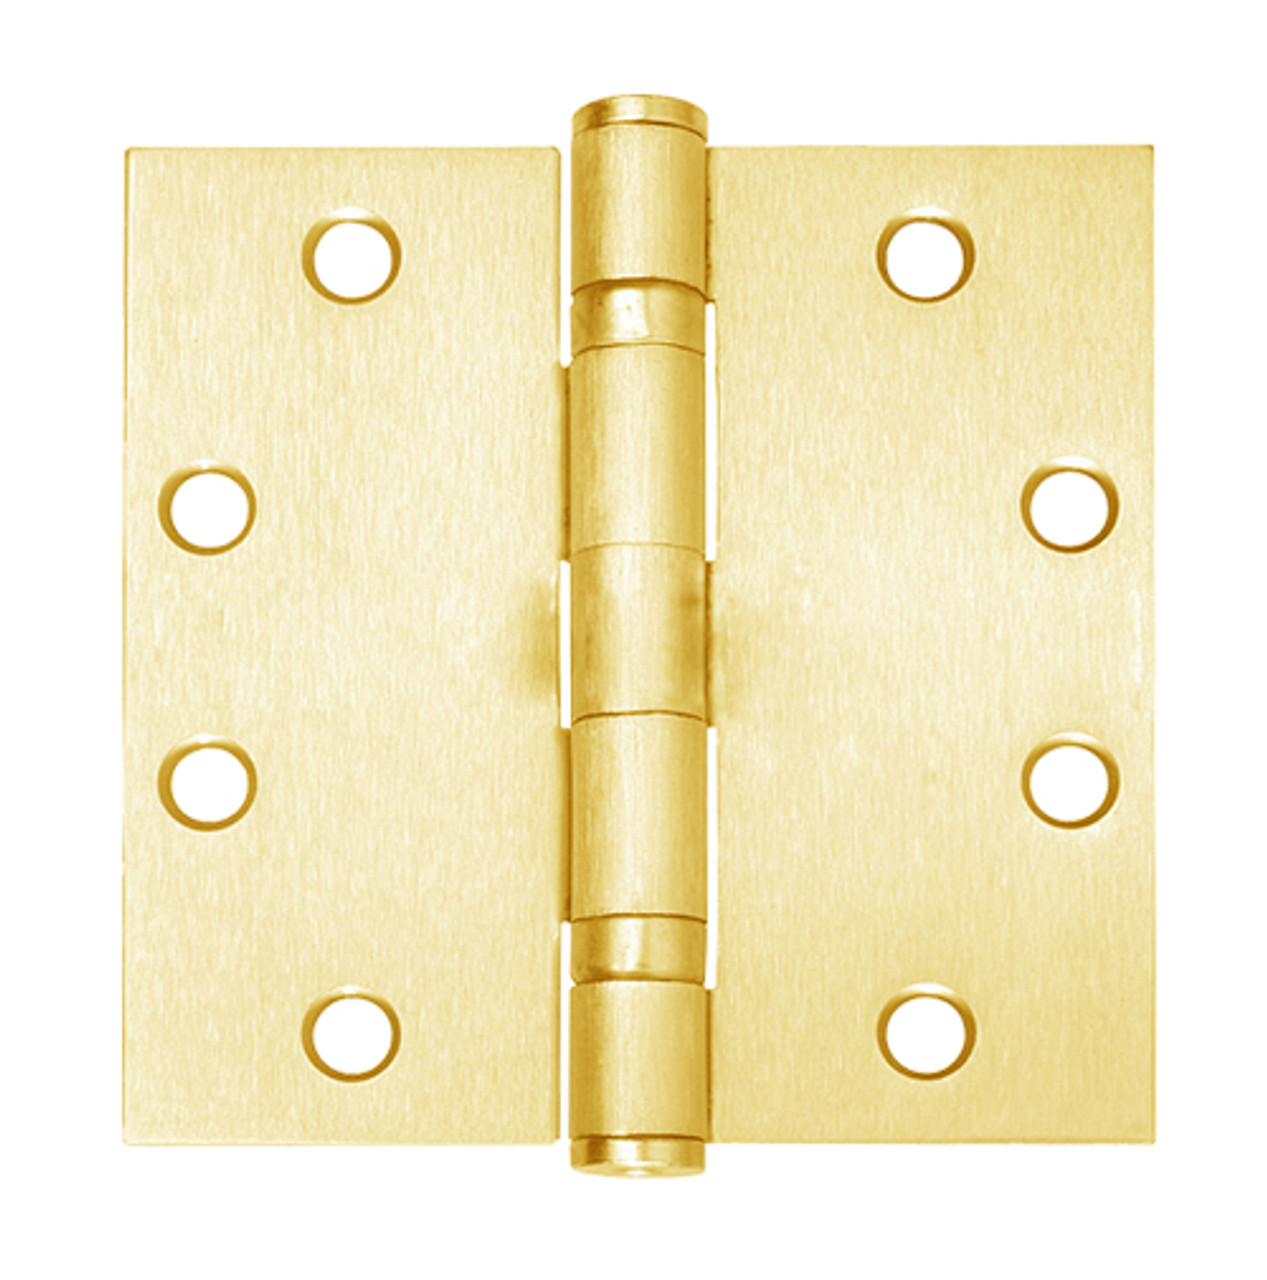 5BB1-3-5x3-5-632-NRP IVES 5 Knuckle Ball Bearing Full Mortise Hinge in Bright Brass Plated